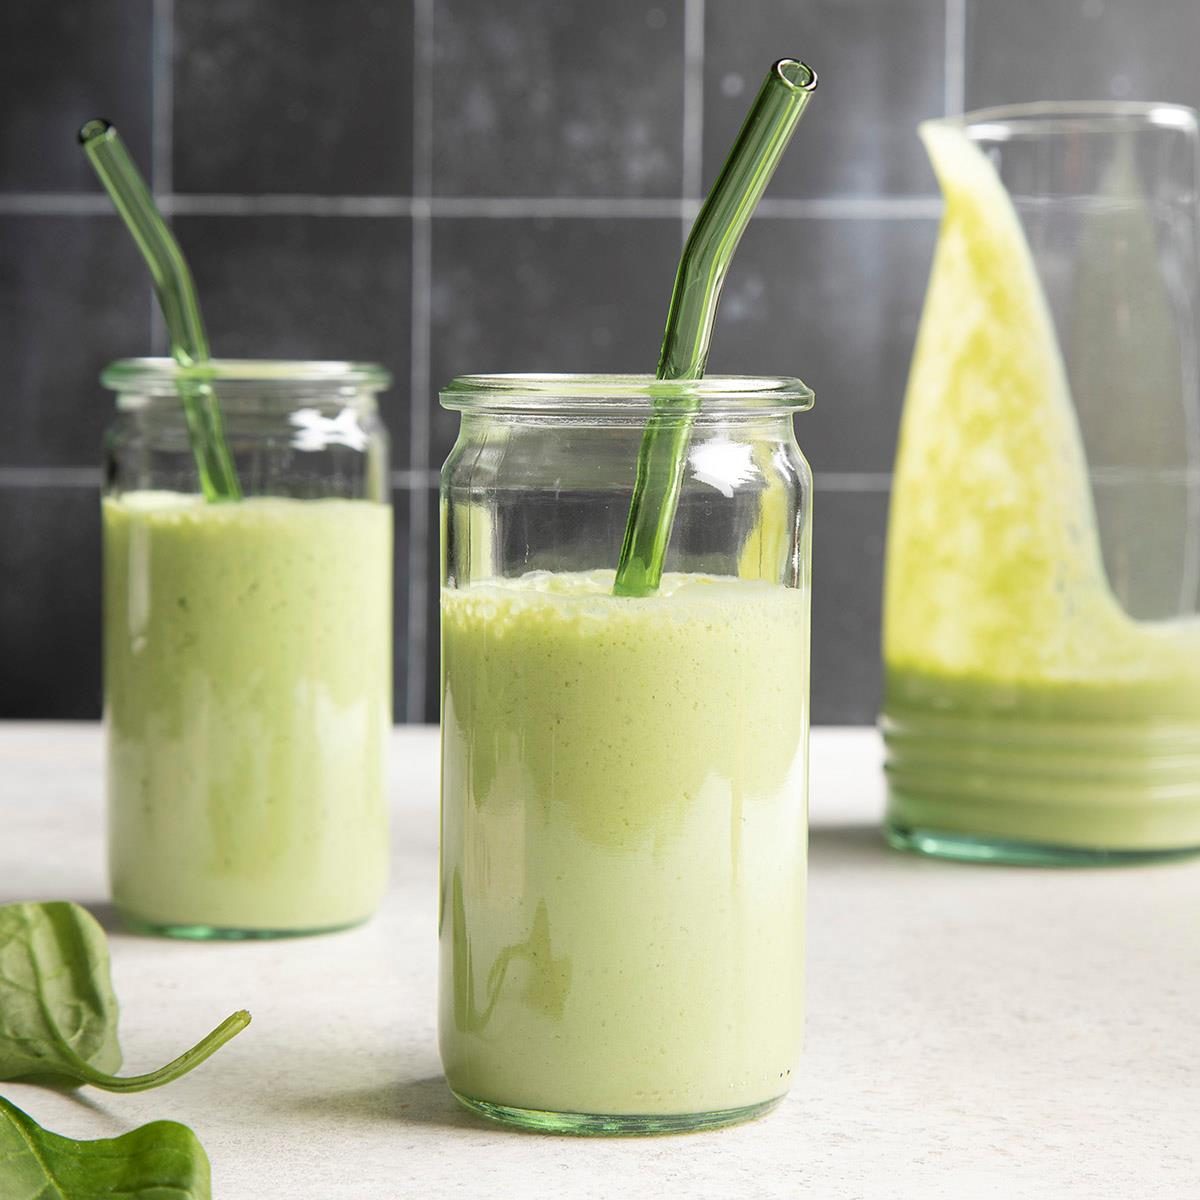 Spinach Smoothie Exps Ft23 273350 St 3 23 1